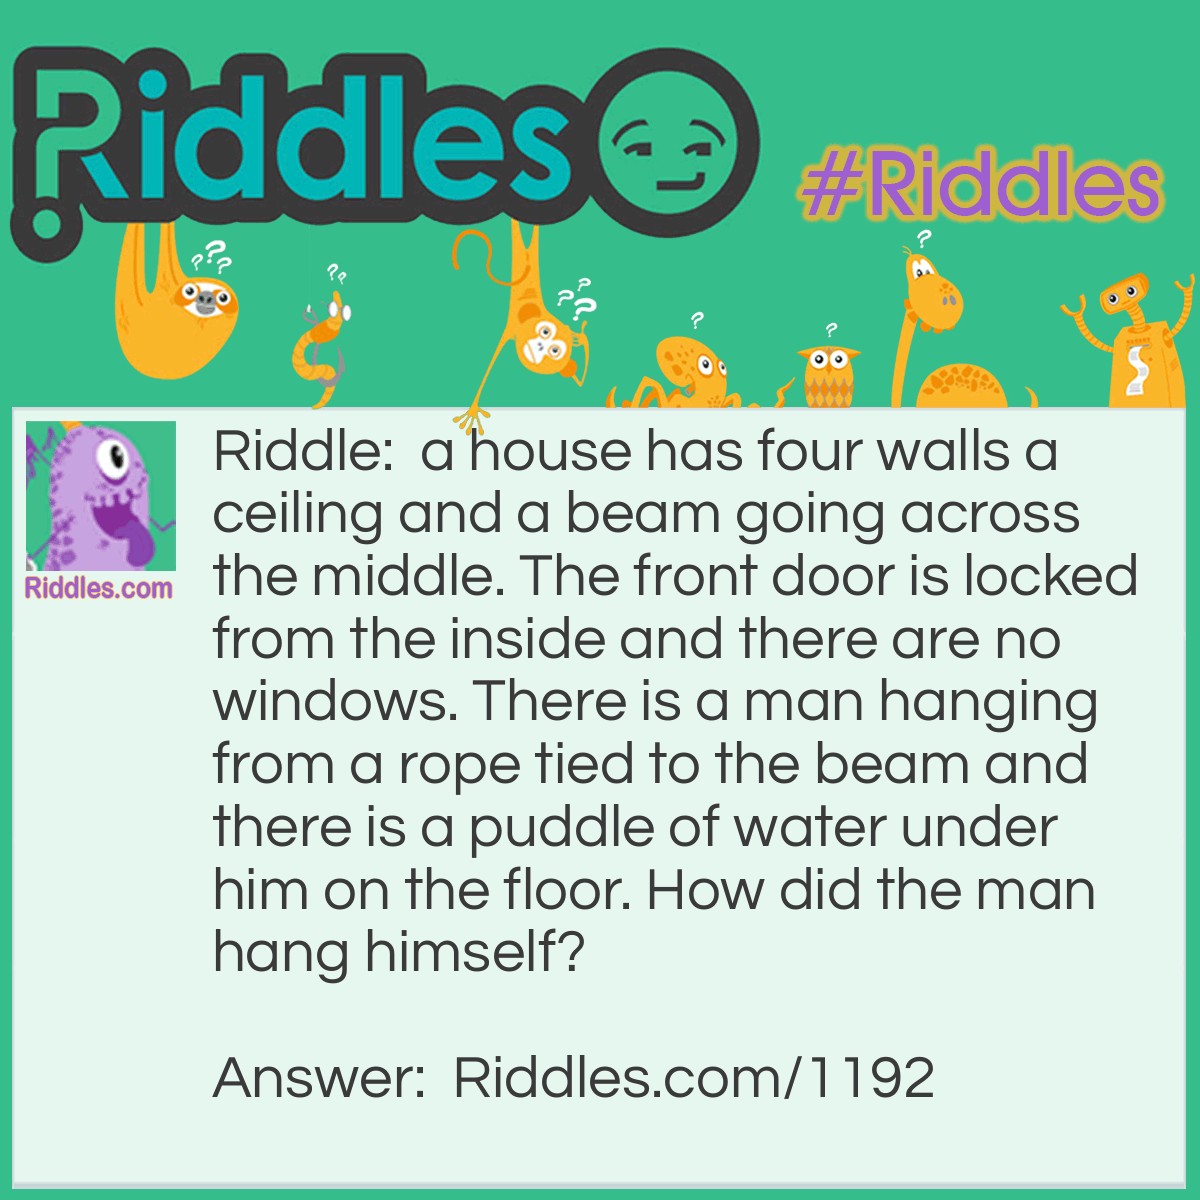 Riddle: A house has four walls a ceiling and a beam going across the middle. The front door is locked from the inside and there are no windows. There is a man hanging from a rope tied to the beam and there is a puddle of water under him on the floor. How did the man hang himself? Answer: The puddle of water under him was a ice cube that he stepped on and waited for it to melt